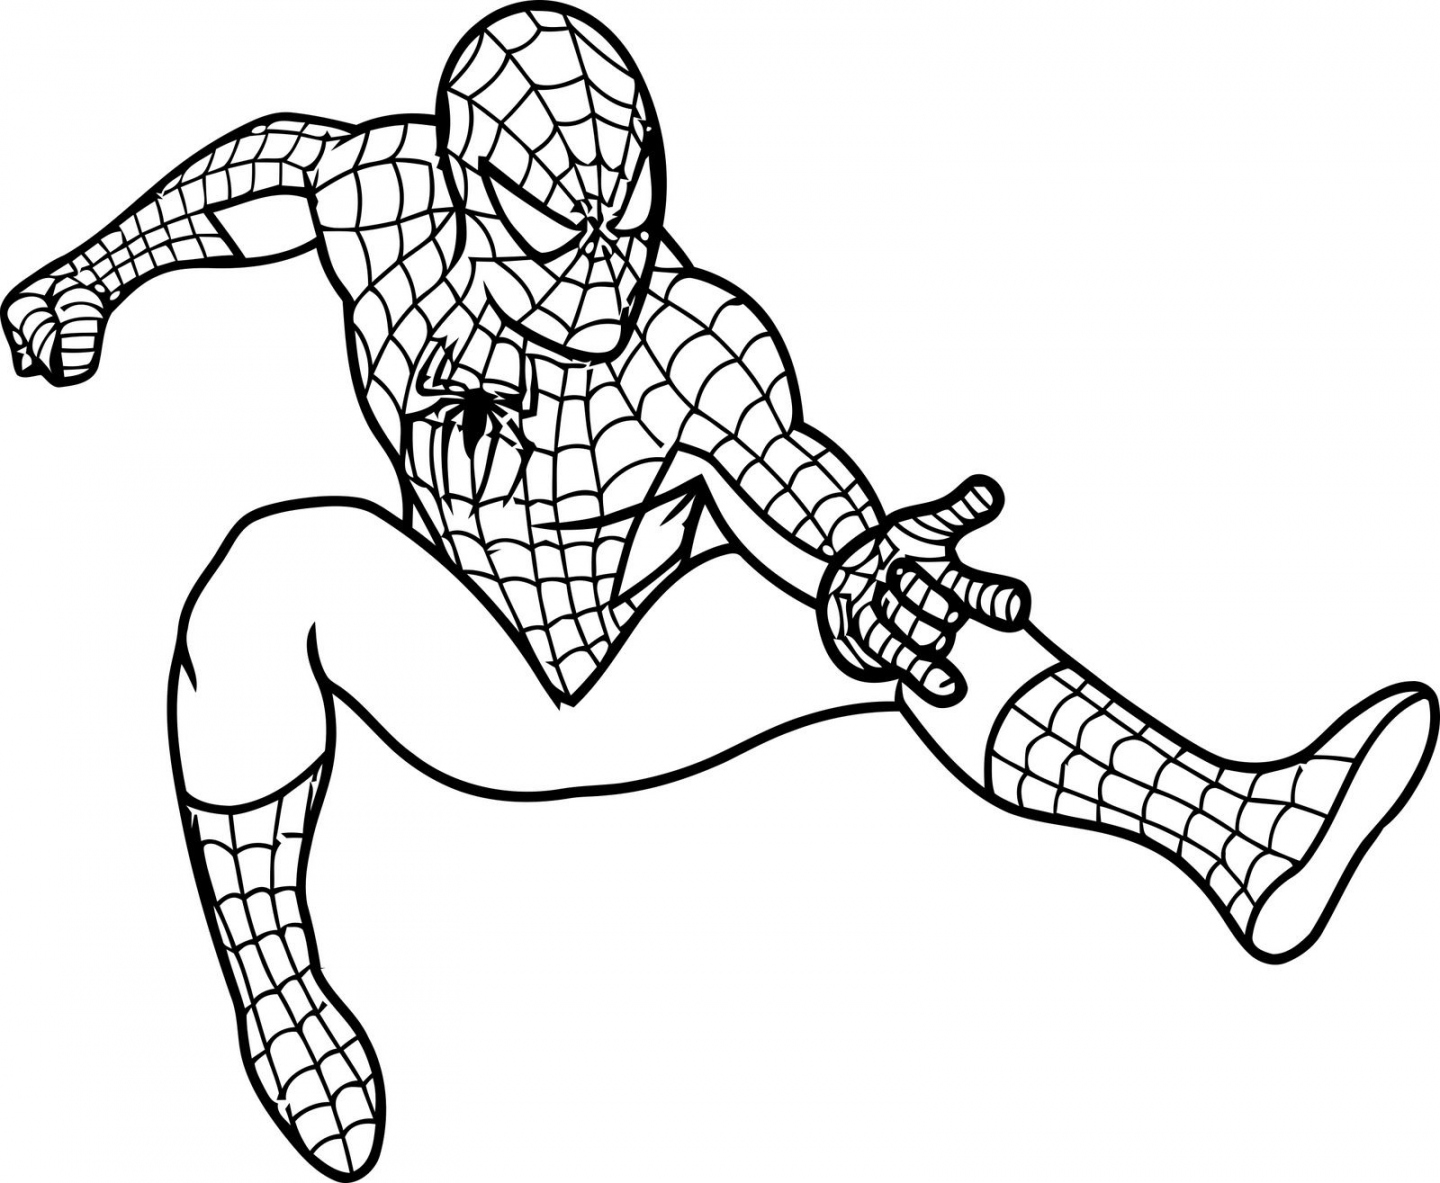 Spiderman Free Printable Coloring Pages - Printable - Pin on Projects to Try